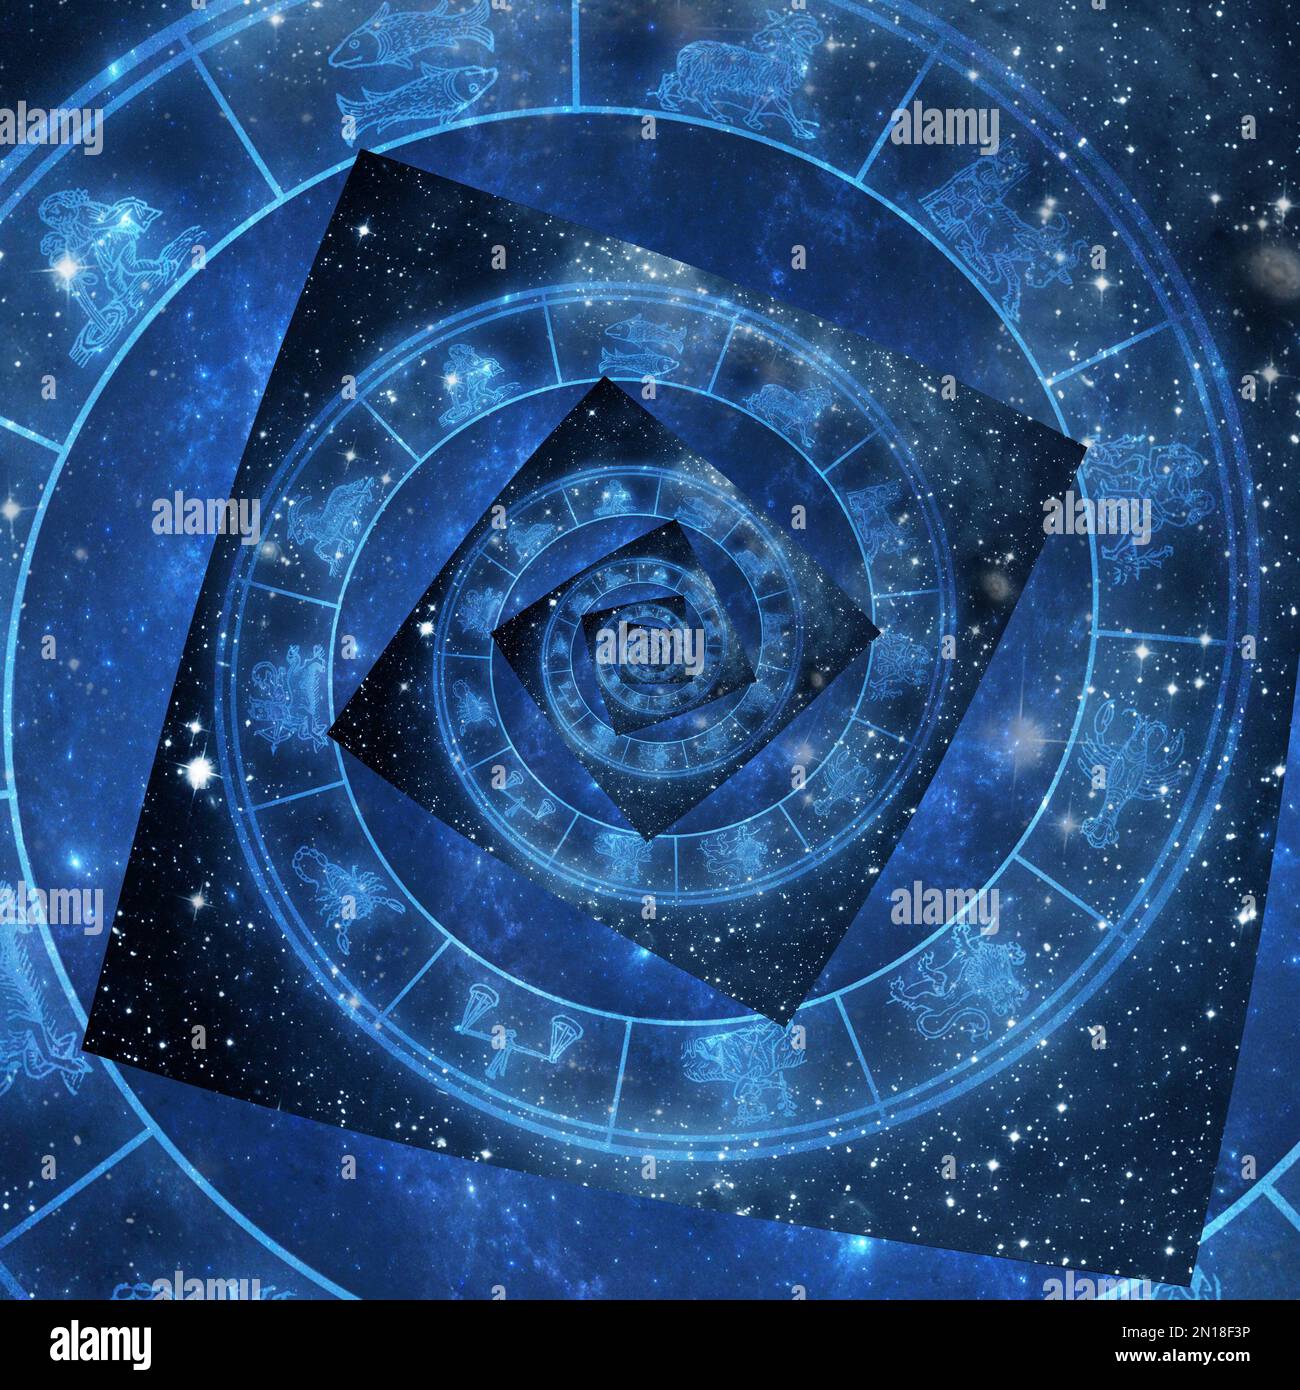 astrology spiral with zodiac signs Stock Photo